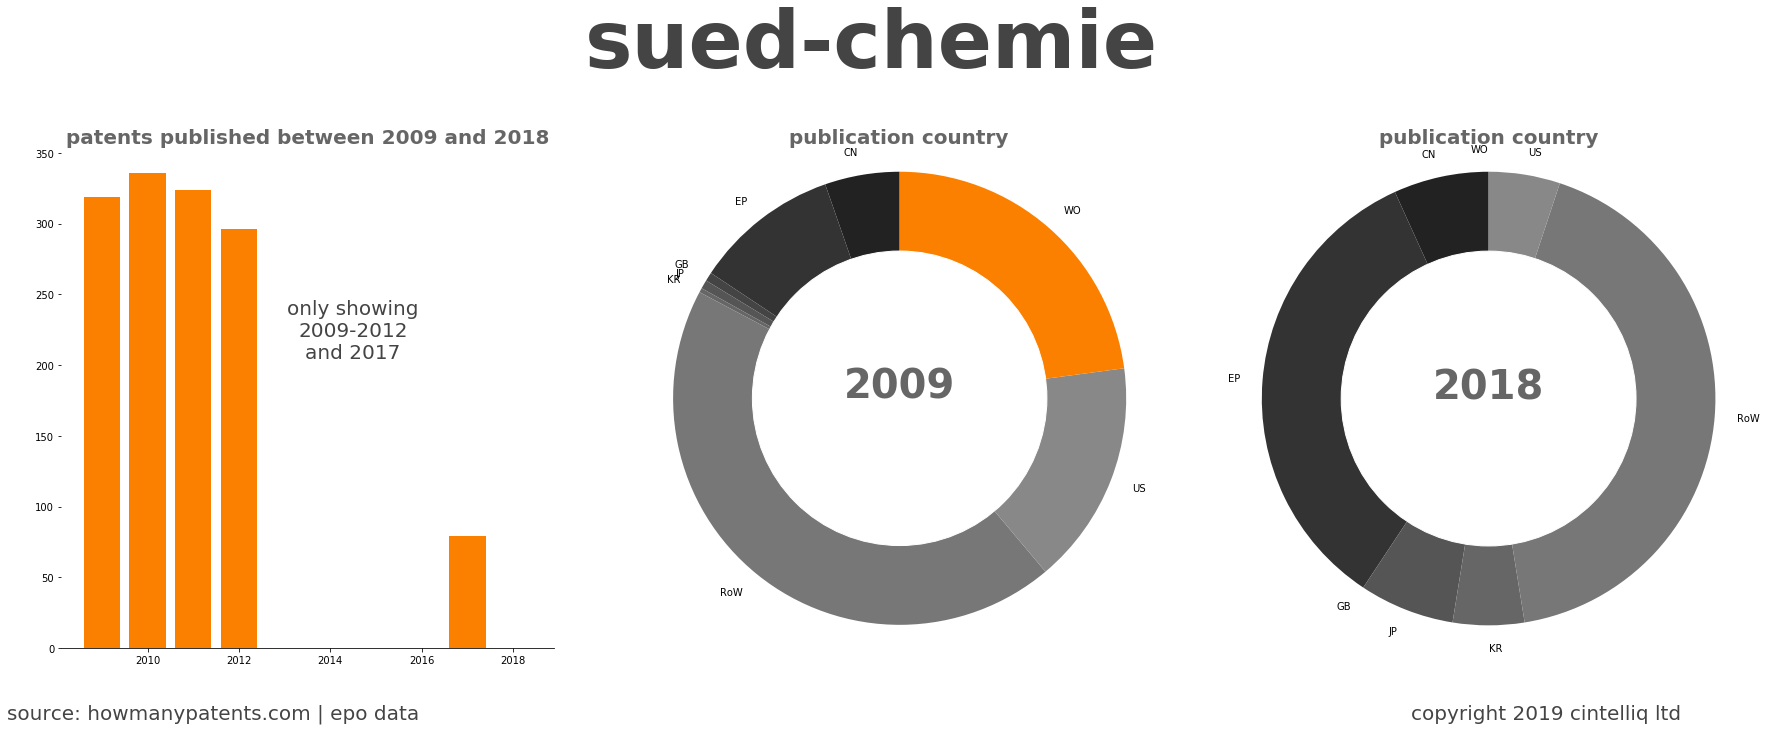 summary of patents for Sued-Chemie